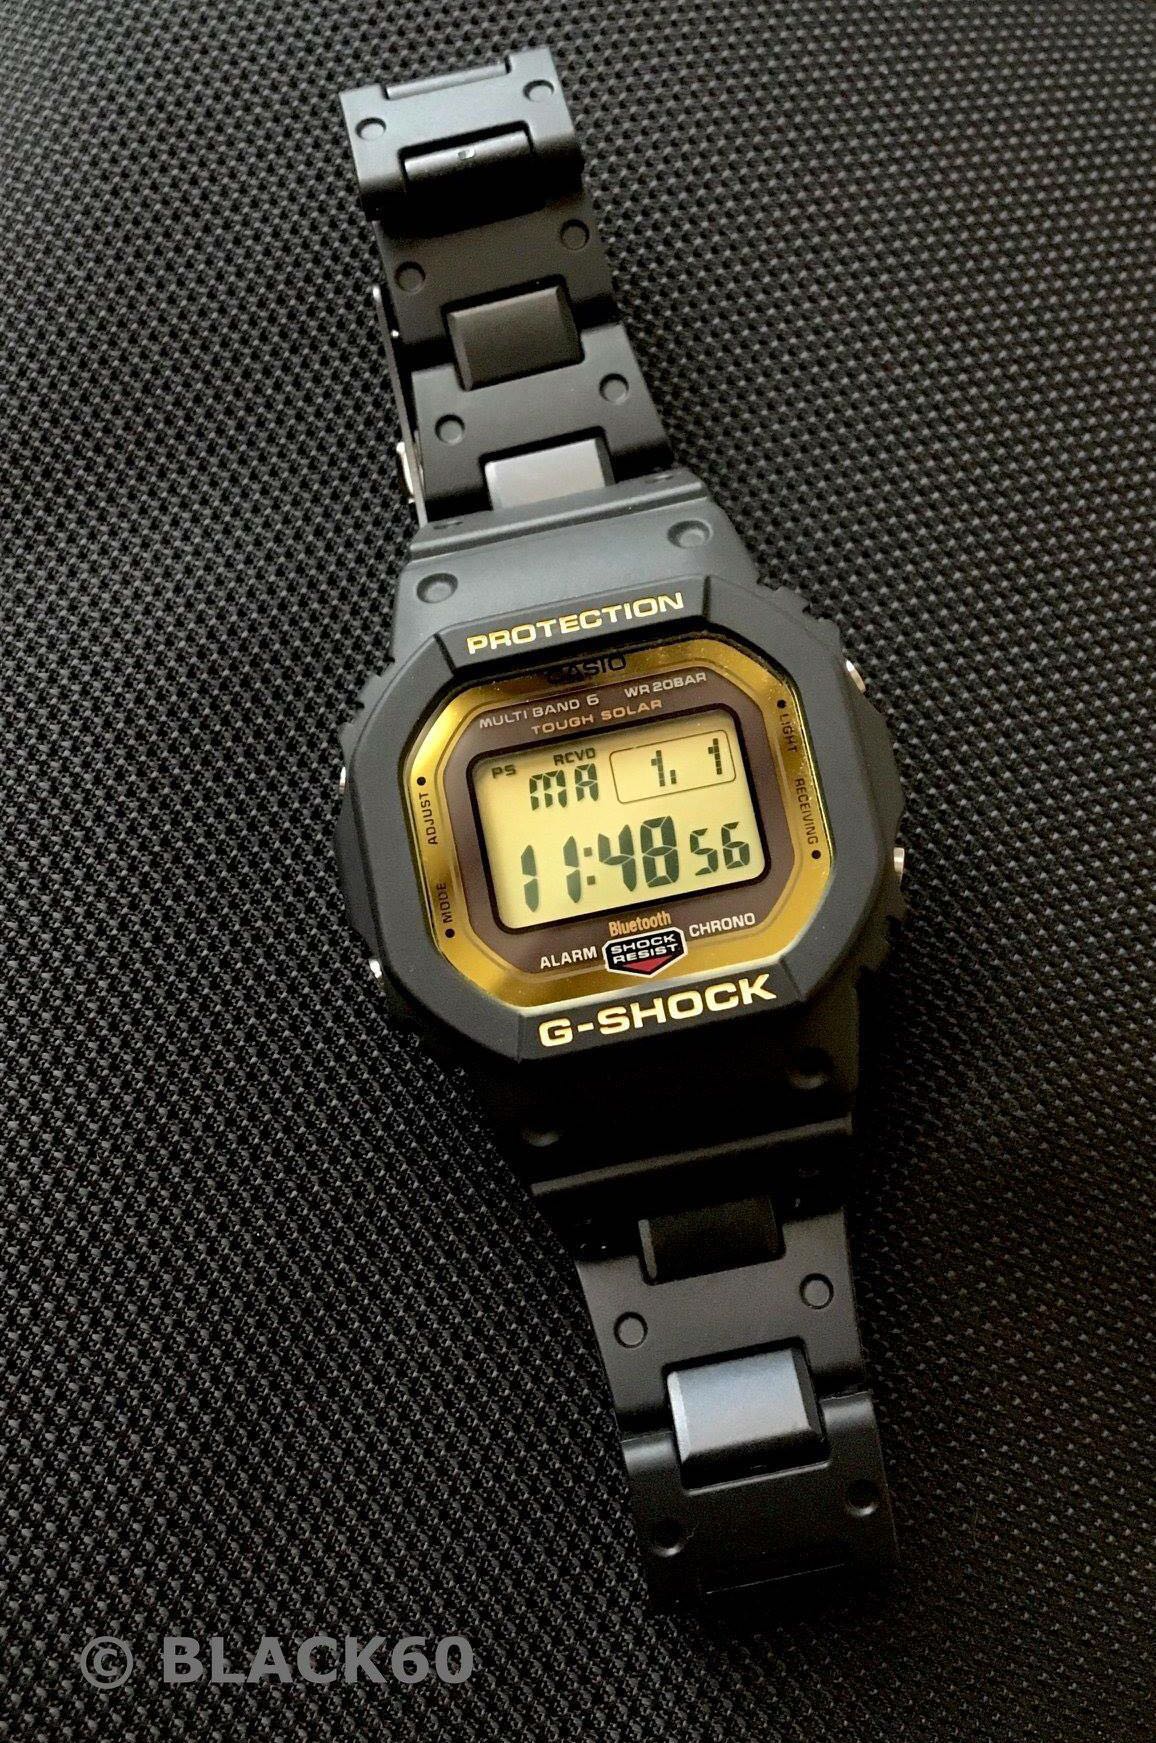 Reserved Original And Authentic Gw B5600bc 1d Gshock Tough Solar And Bluetooth Gwb5600 G Shock Gshock G Shock Casio Casio Casio Gwb5600bc1 Gw B5600bc 1 Gw B5600bc 1a